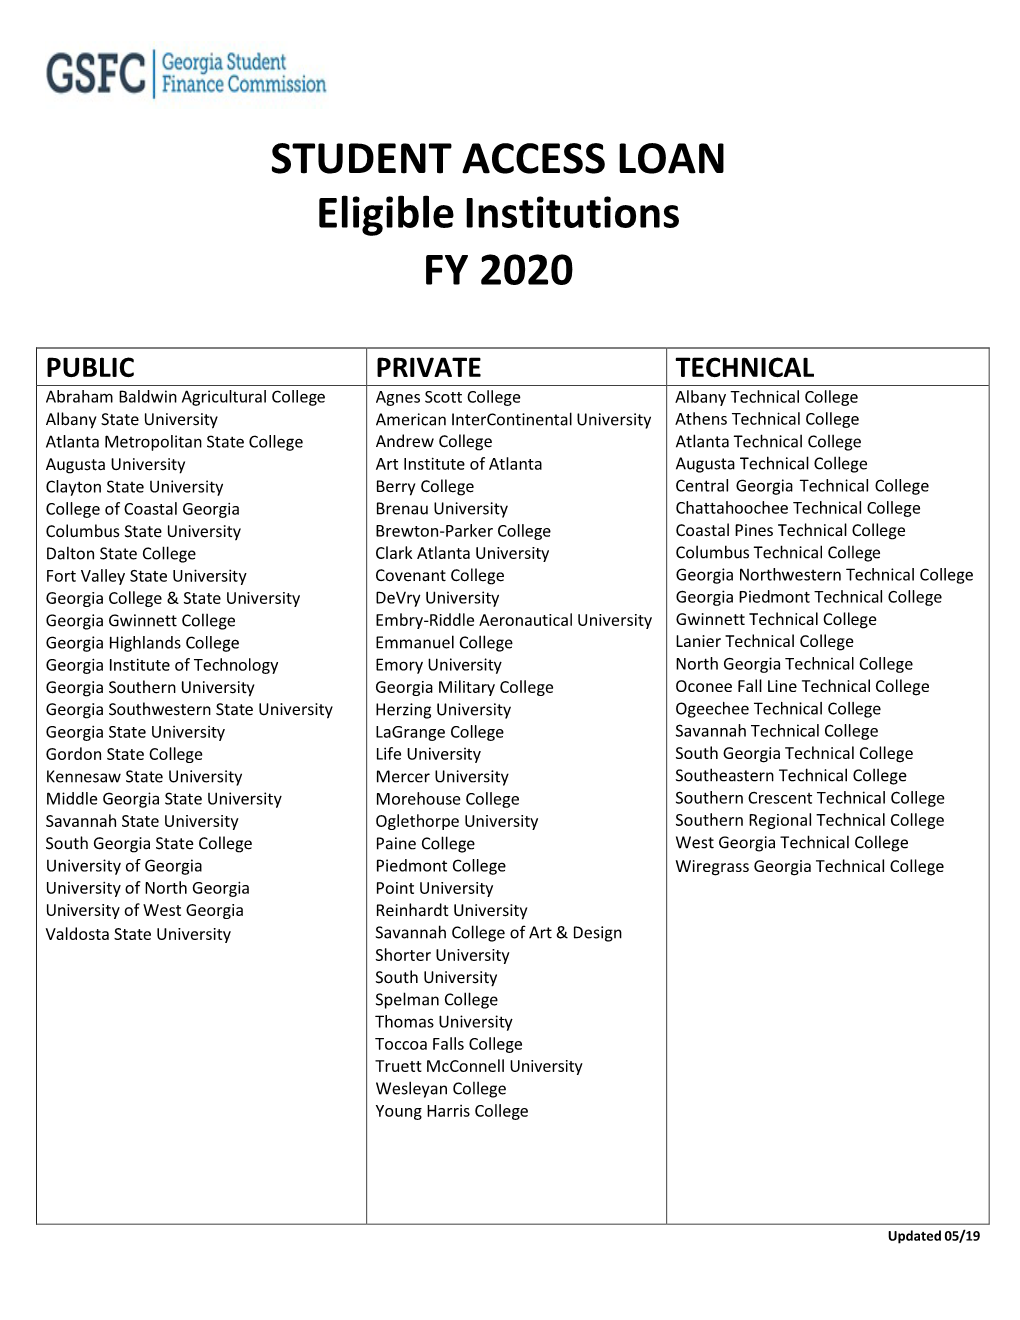 STUDENT ACCESS LOAN Eligible Institutions FY 2020